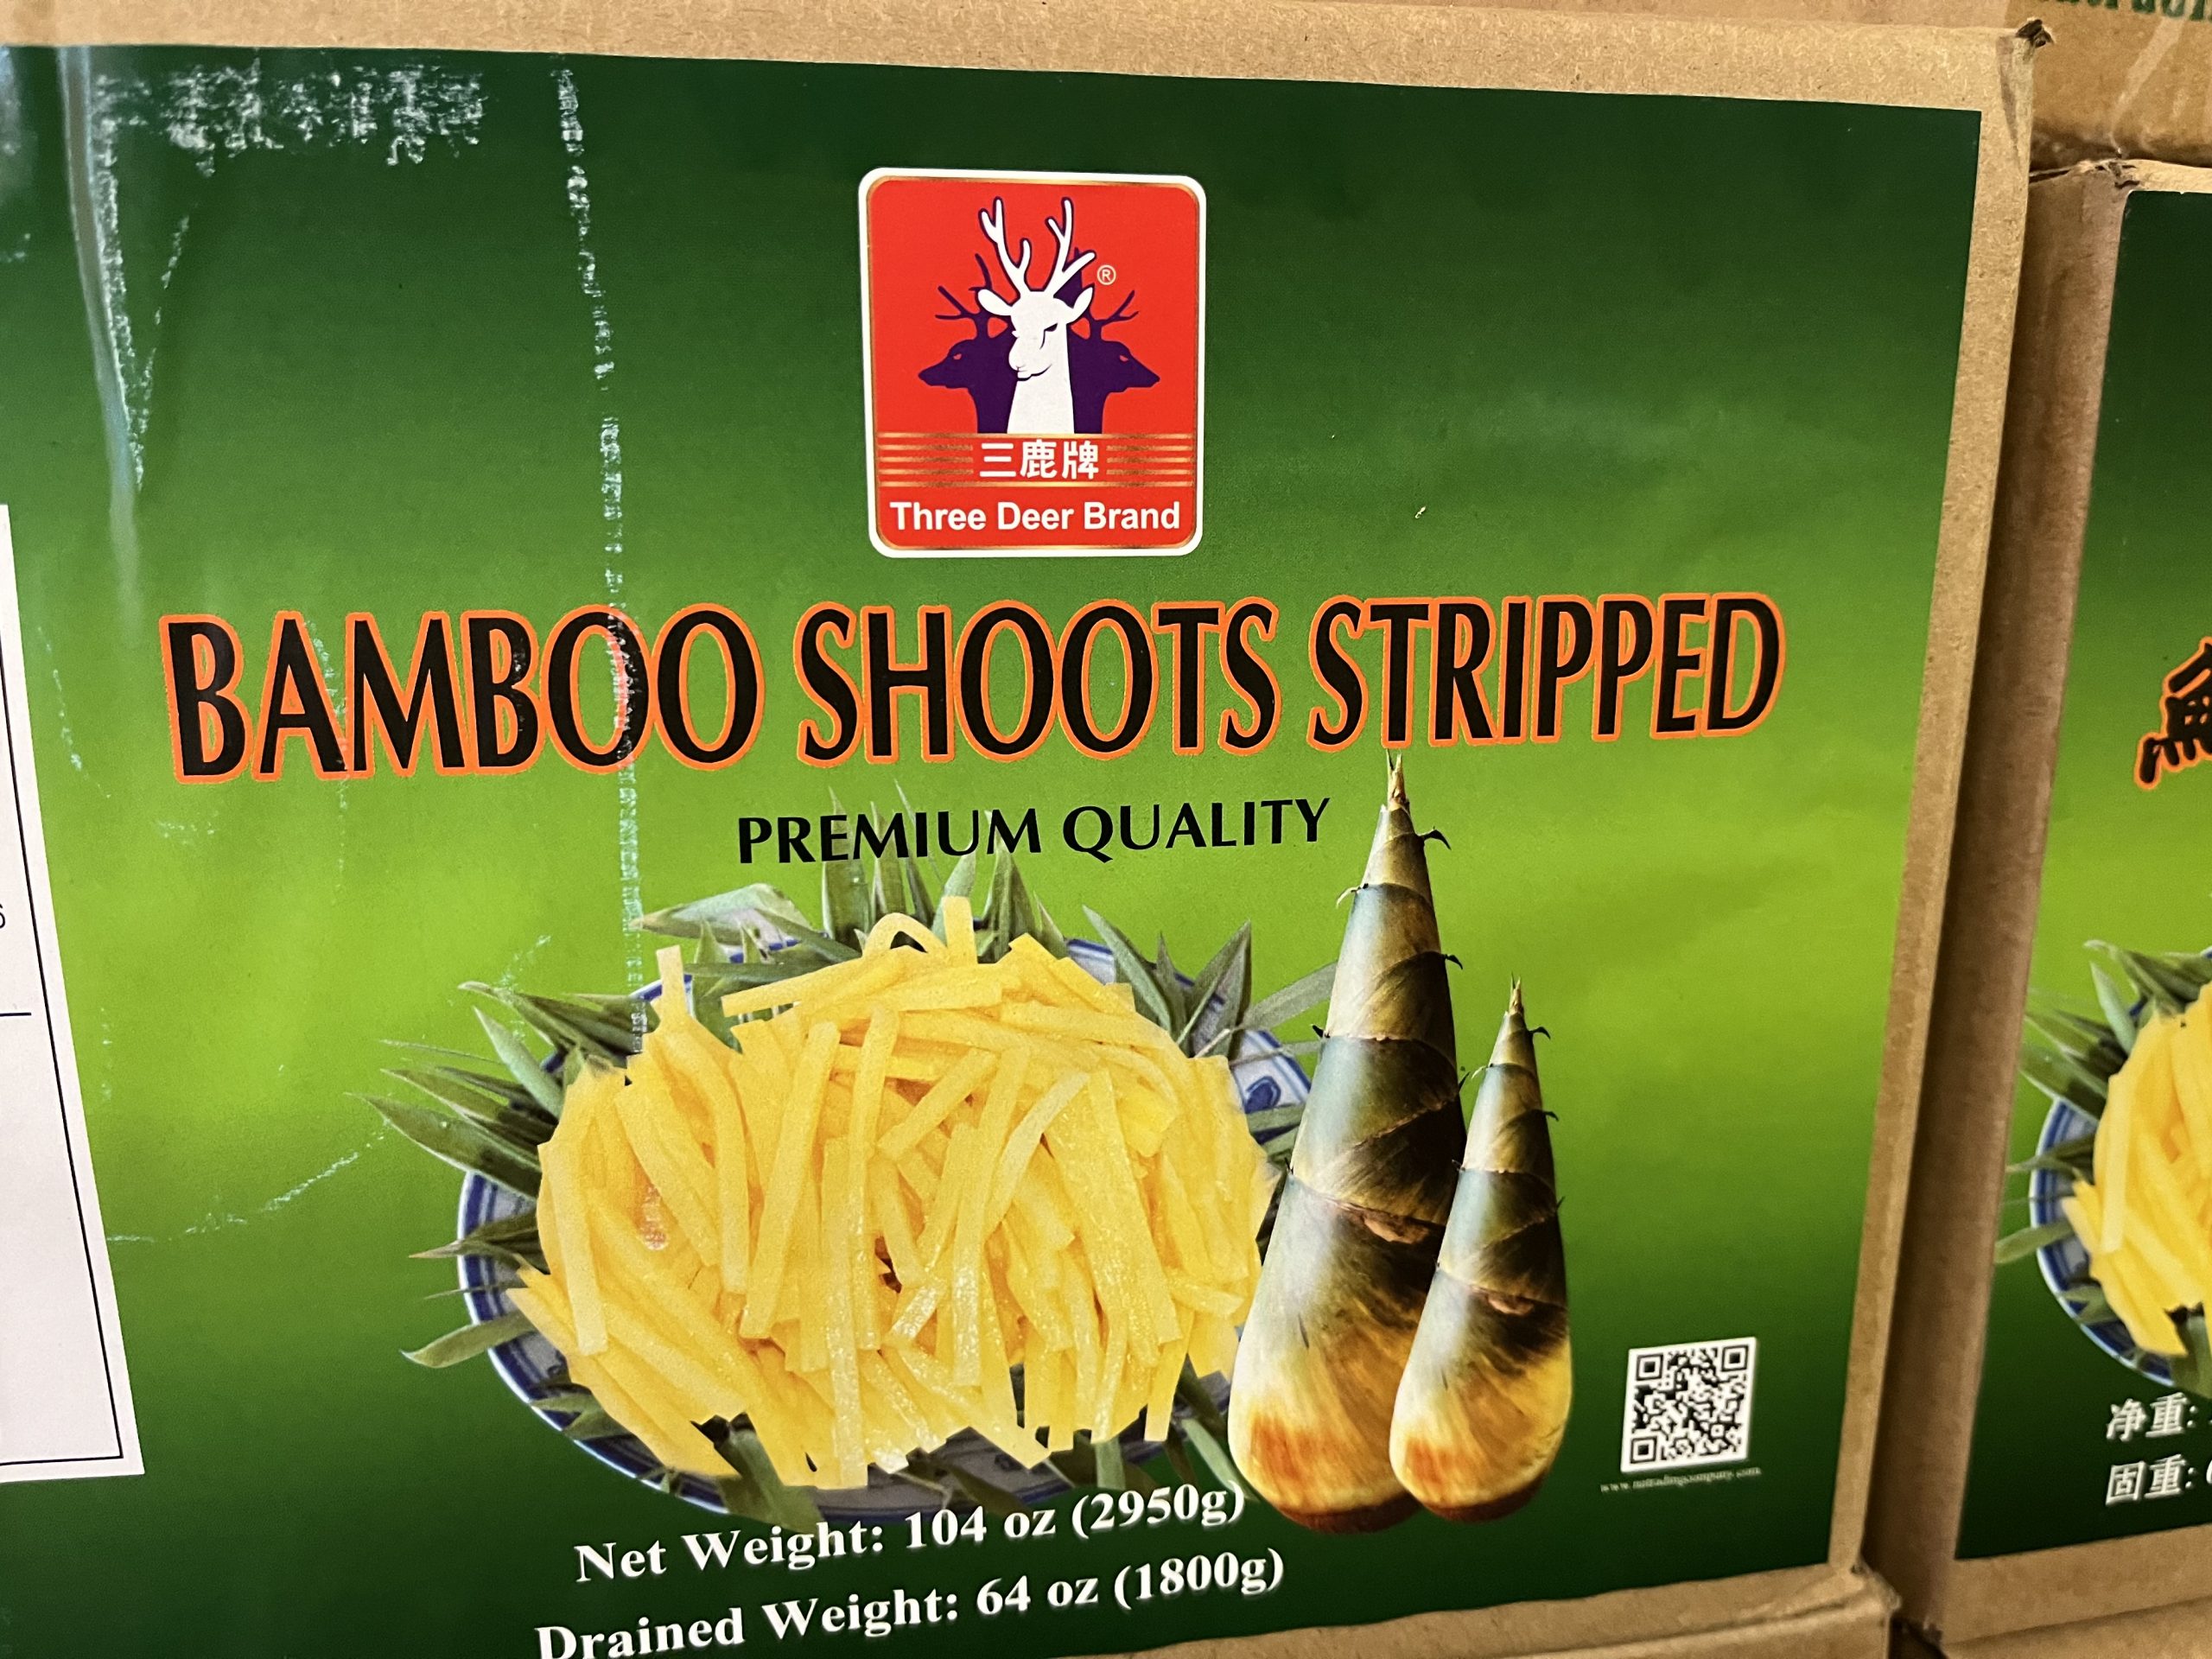 Bamboo Shoots Stripped